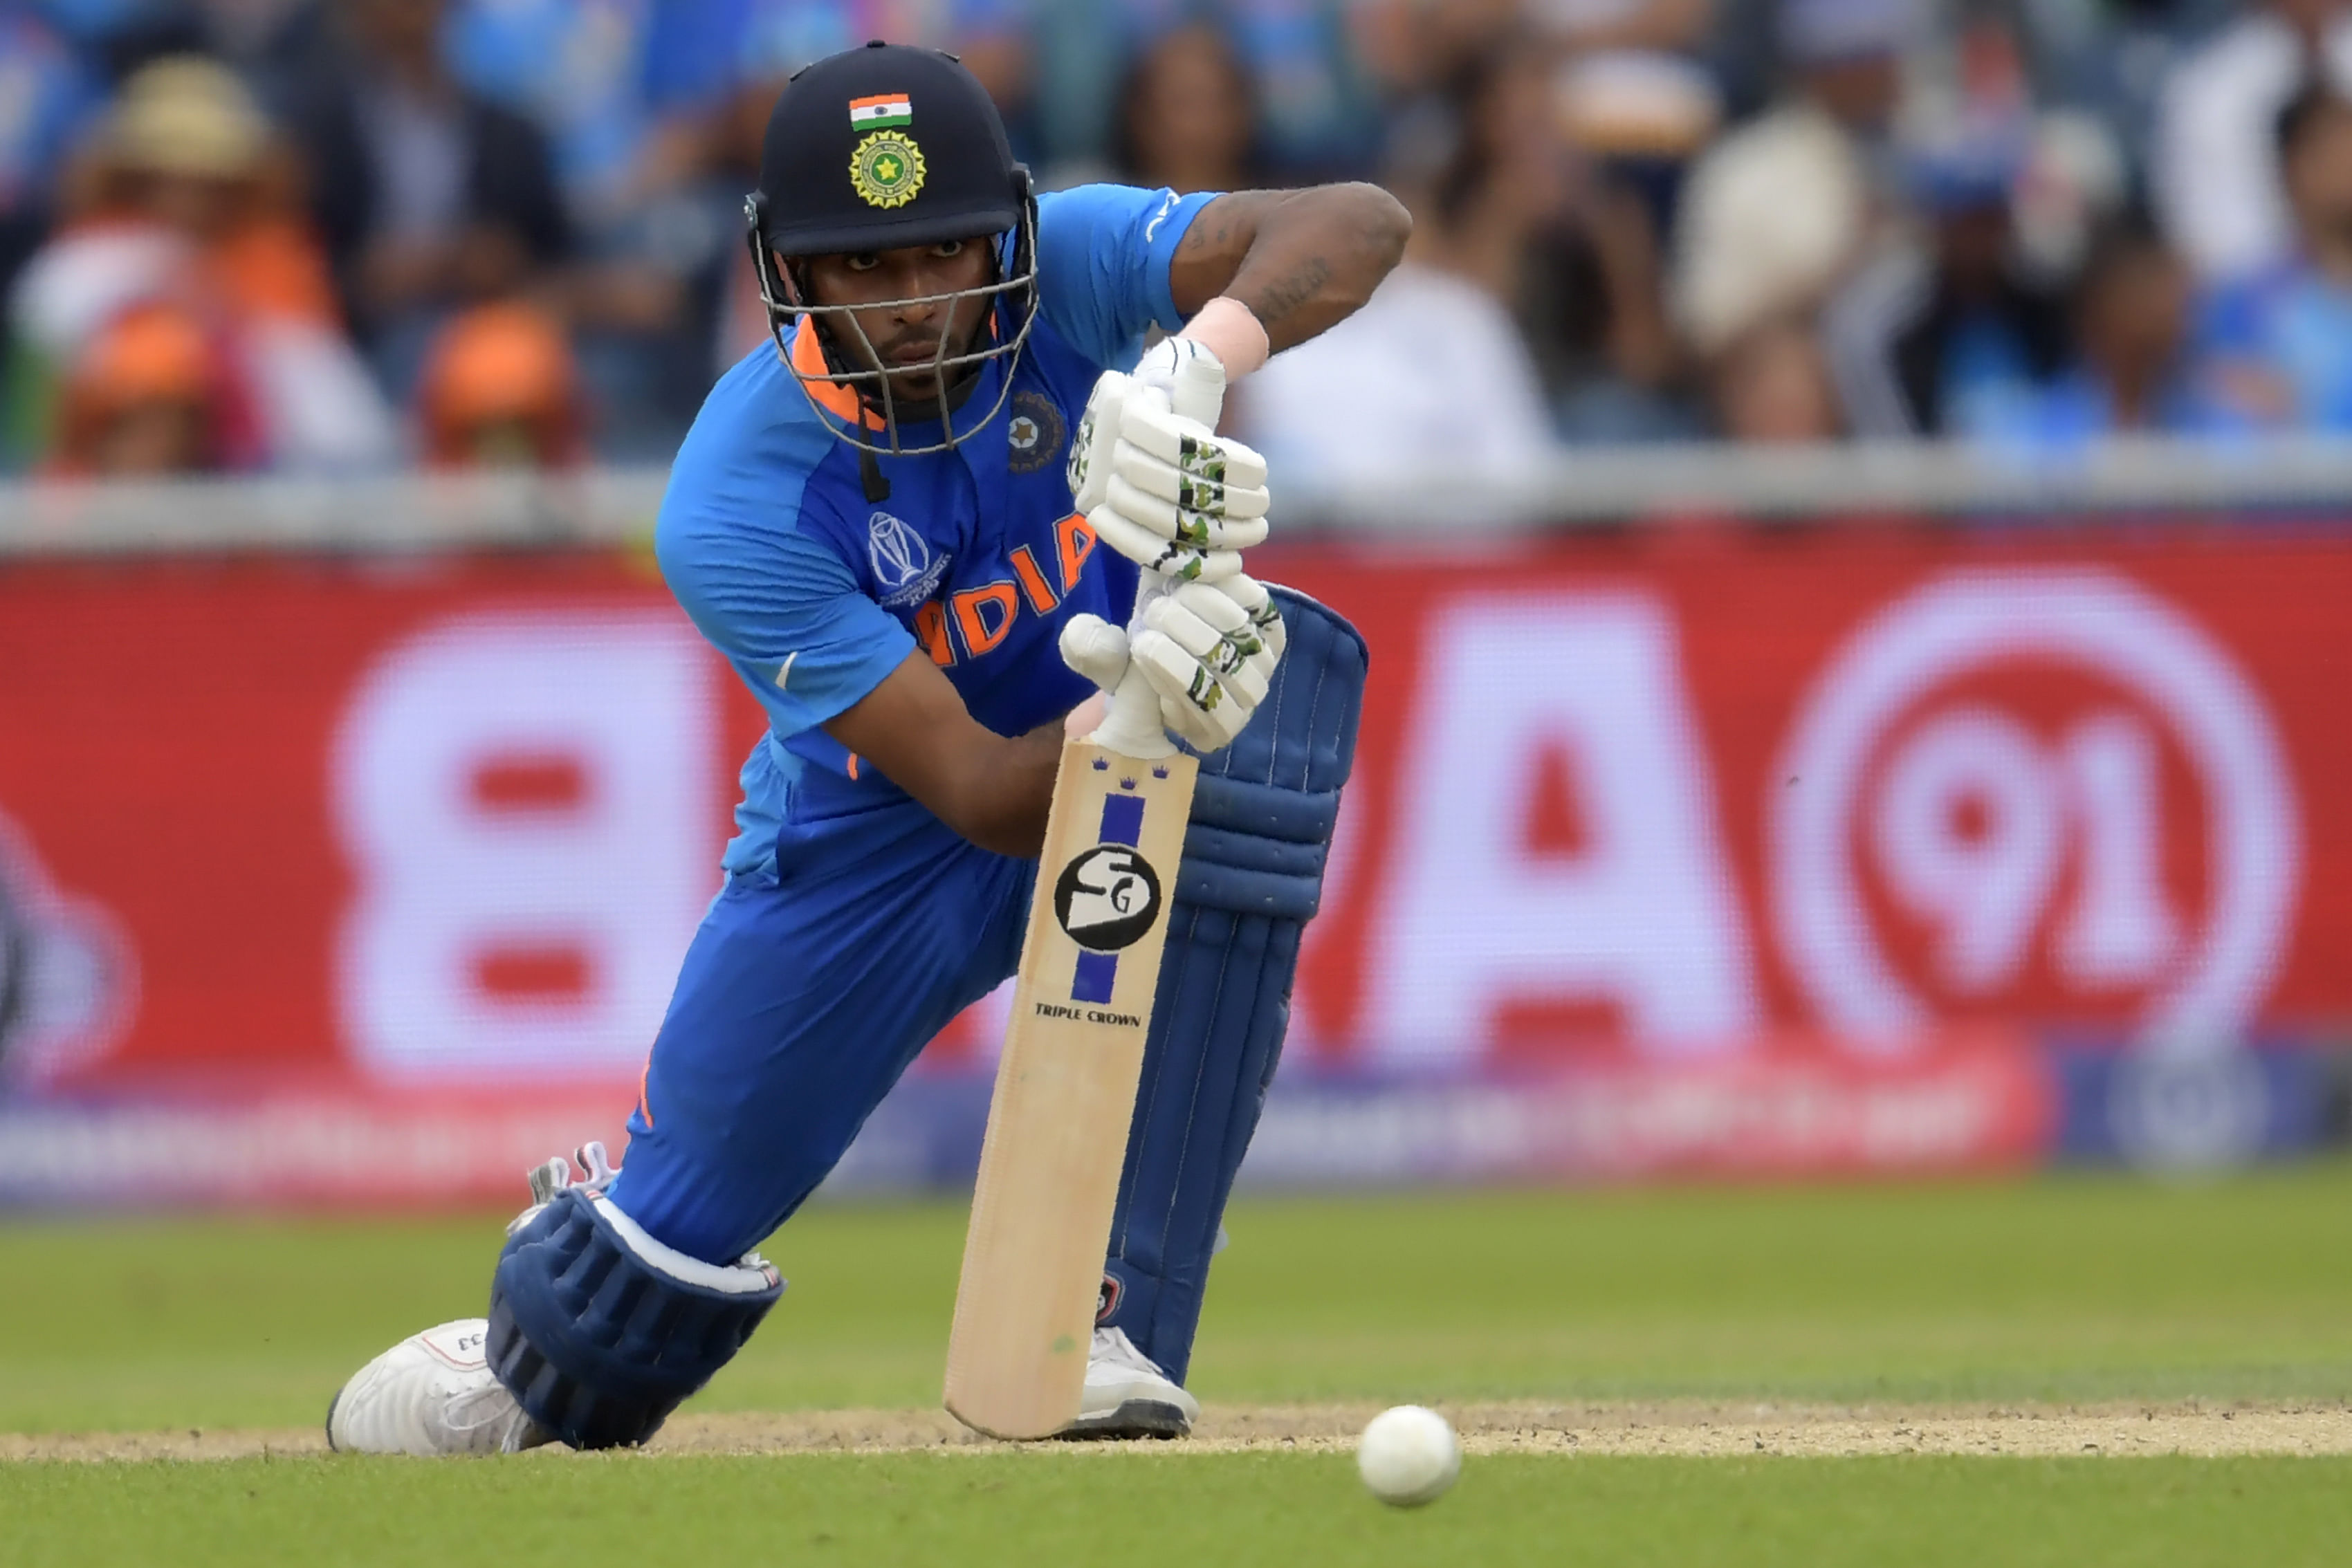 Pandya said he owes it to his IPL team Mumbai Indians' coach Ricky Ponting for being there for him during the tough phase. (Credit: AFP Photo)